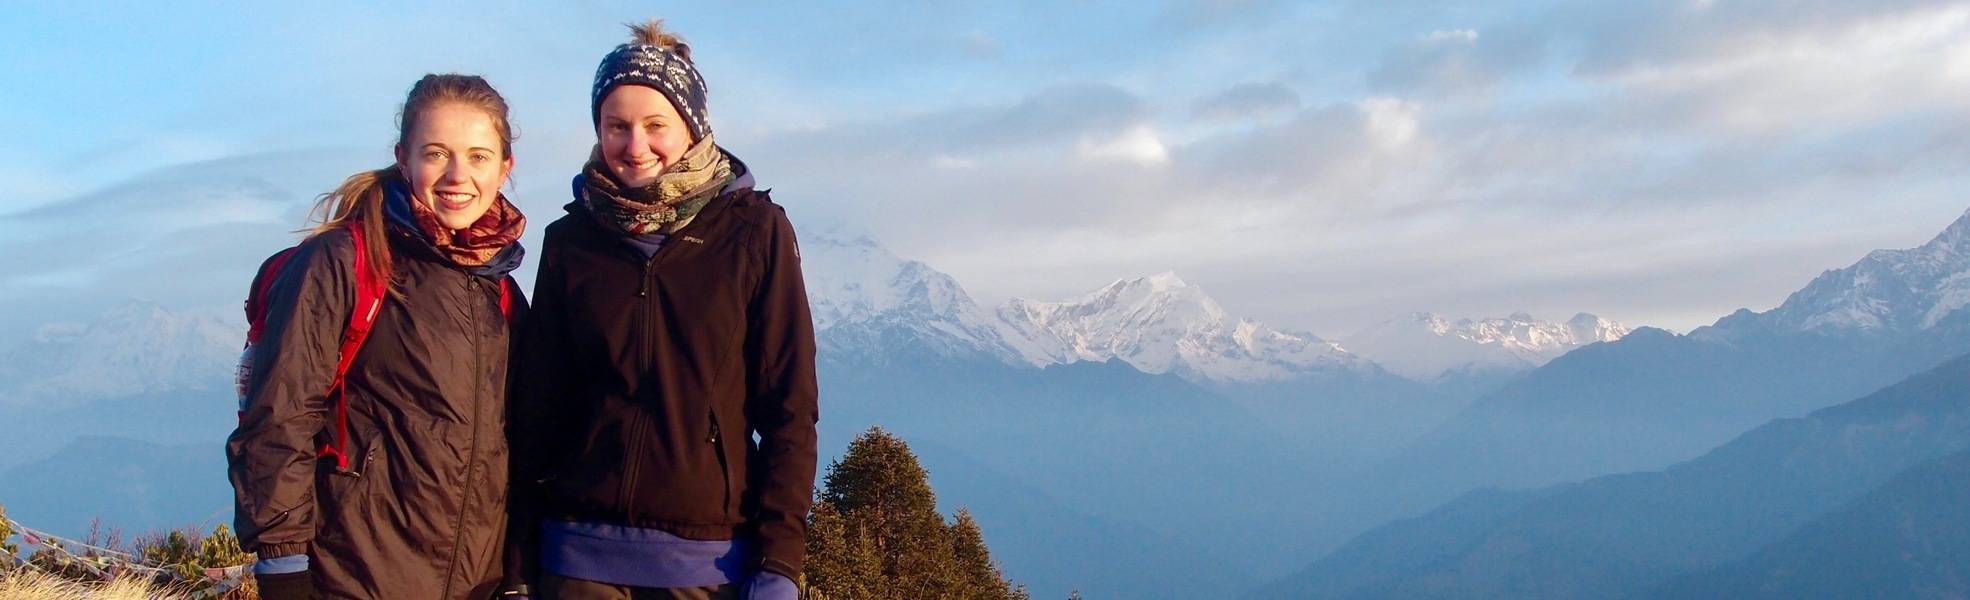 Volunteers discover the mountains on a sabbatical in Nepal